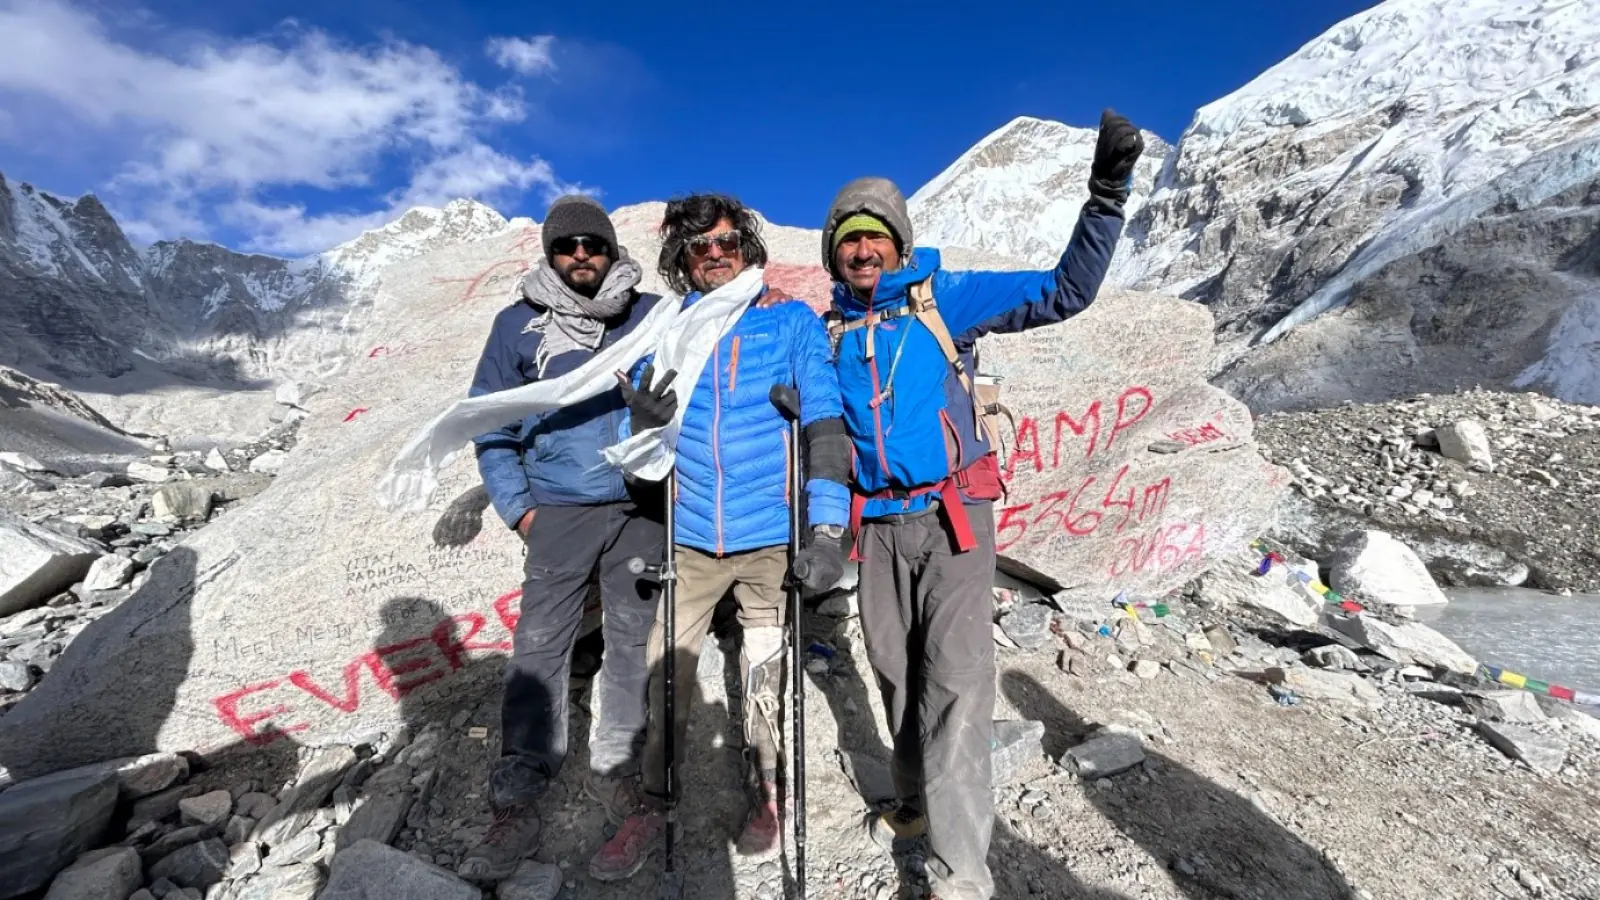 Anuraag Khandelwal conquers EBC with grit and trusty crutches!